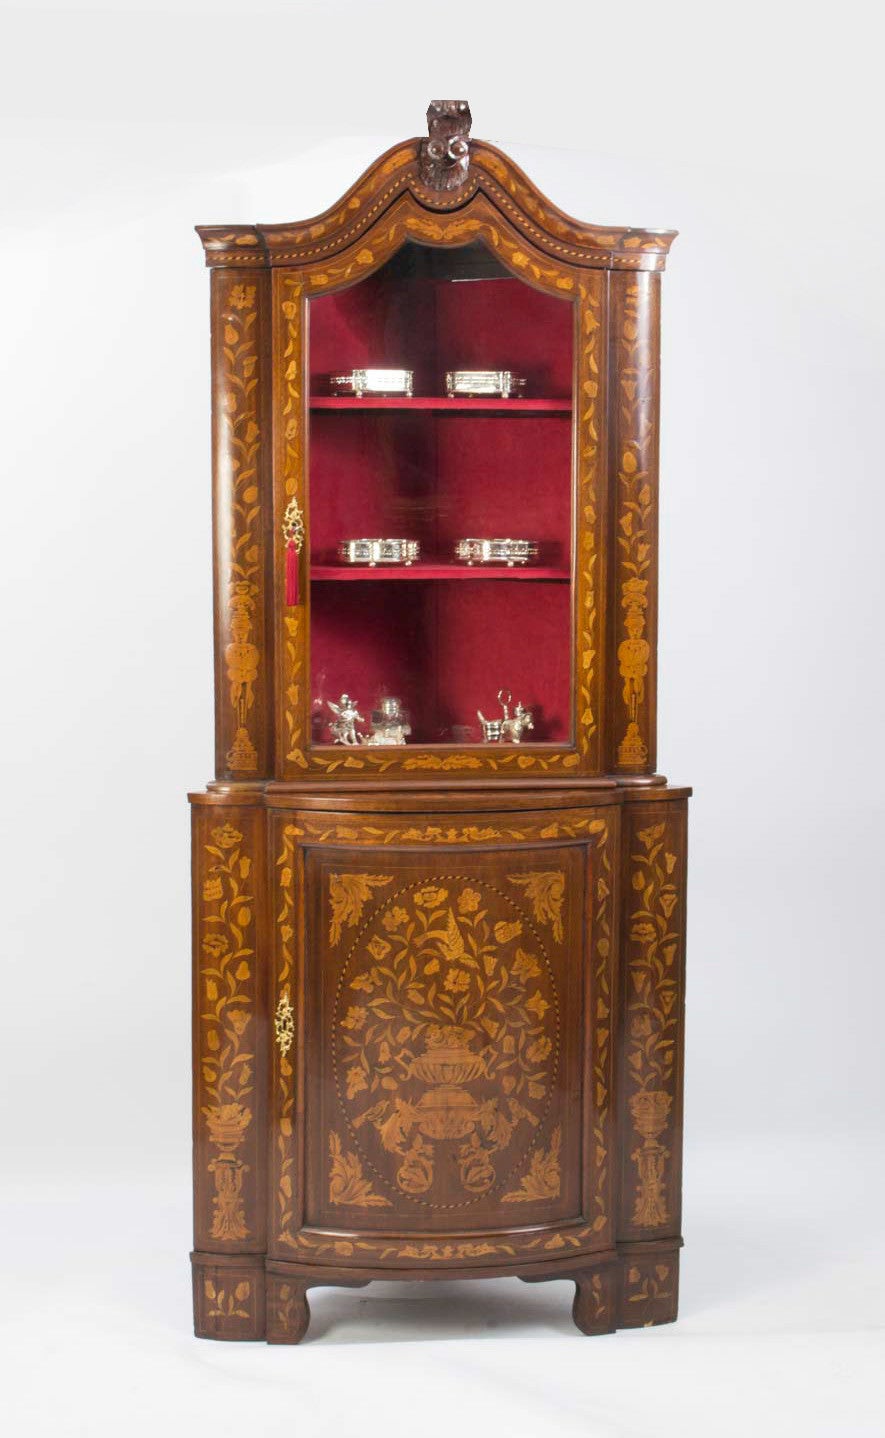 This is an antique Dutch mahogany marquetry bow fronted corner cabinet which is circa 1780 in date. 

The cabinet has fabulous inlaid marquetry of flowering leafy stems, figures, and a fluted urn all outlined with barber pole and boxwood